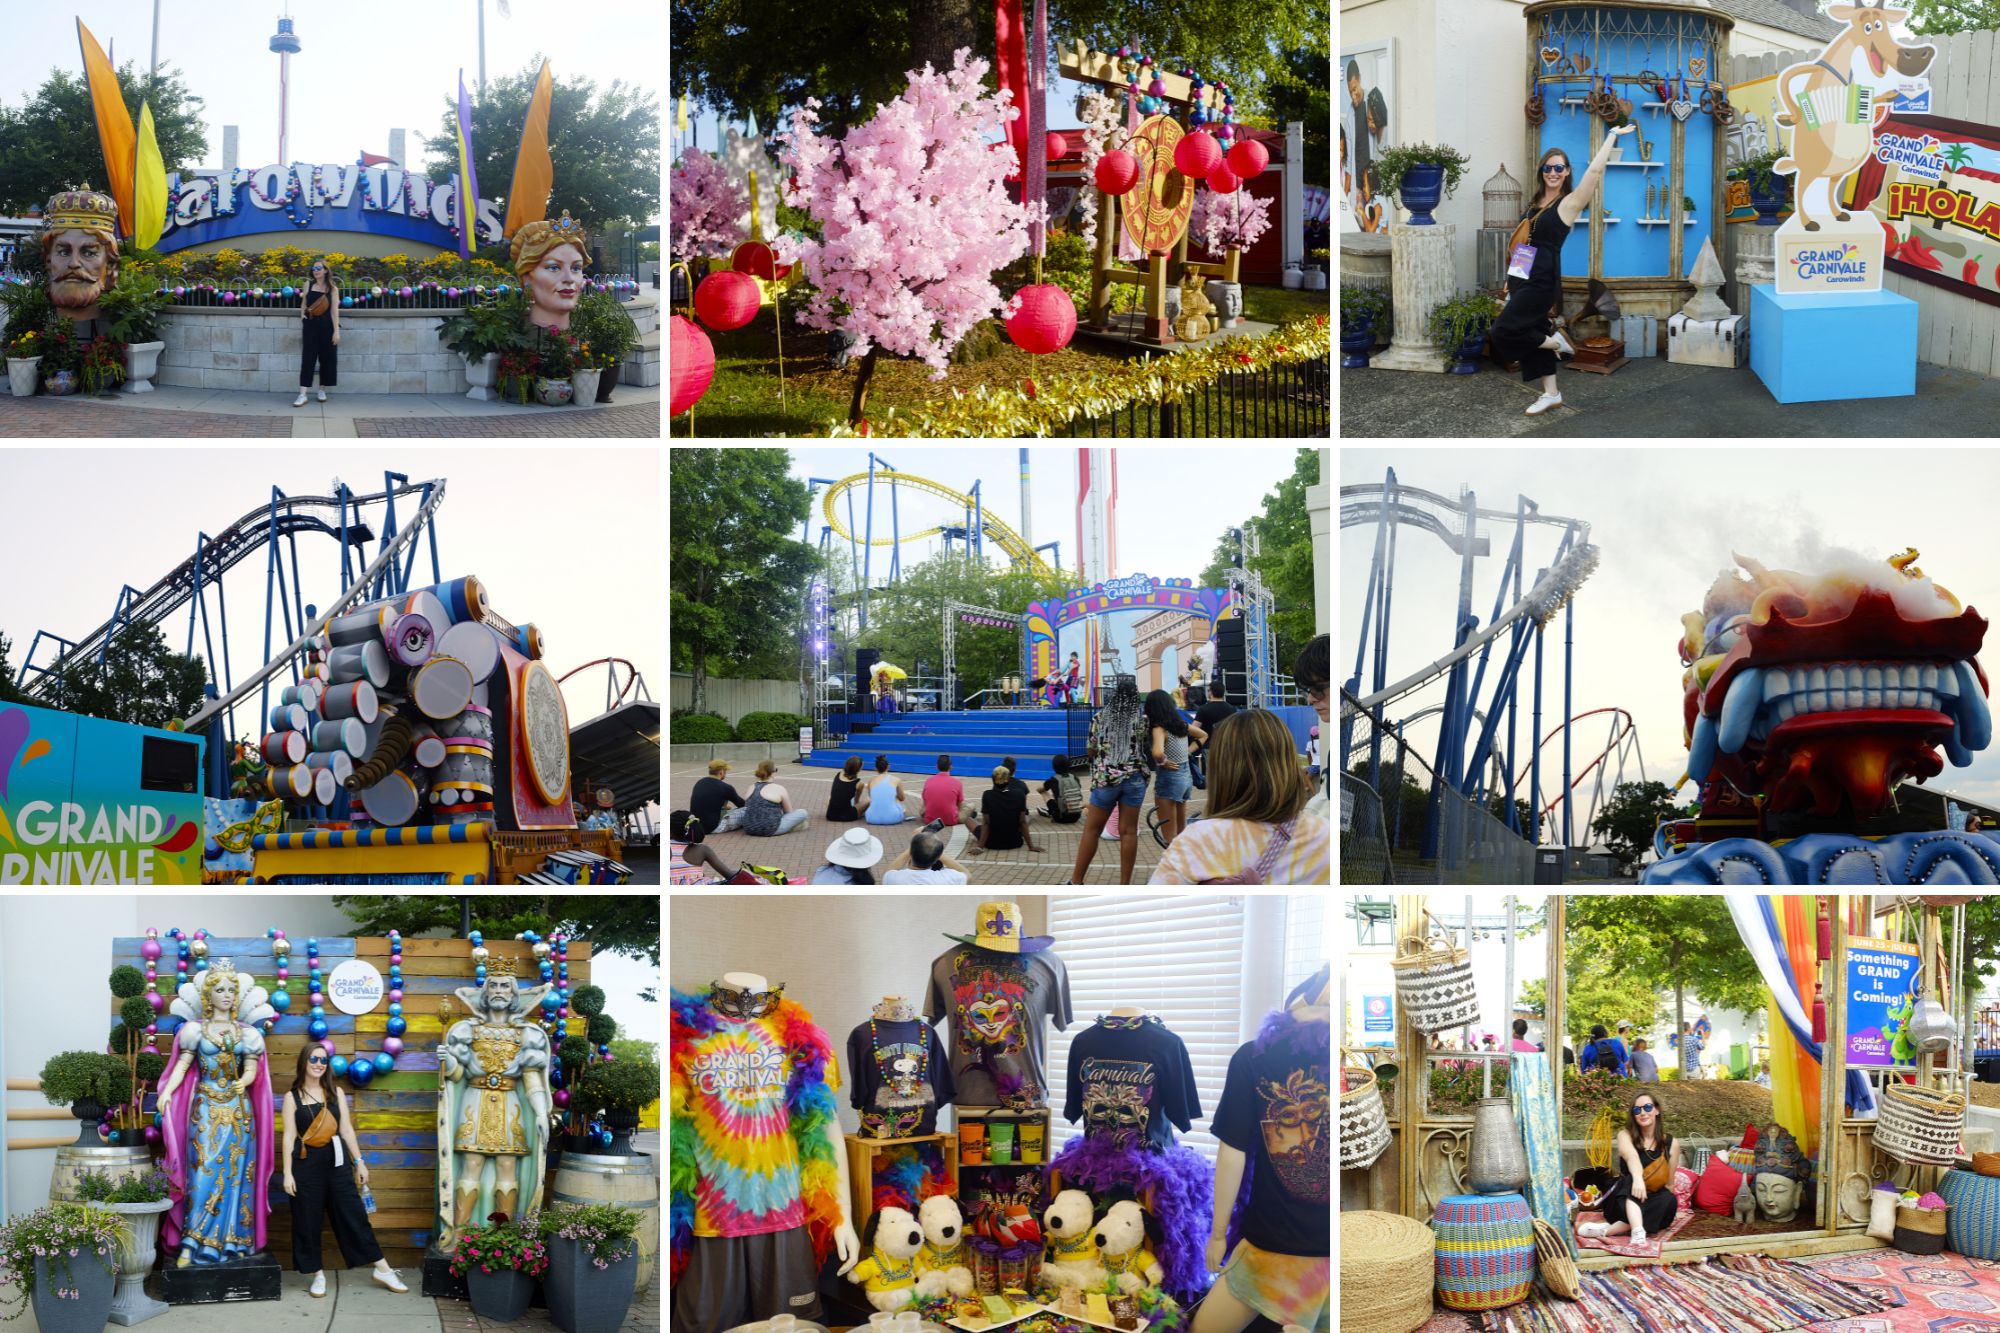 Collage of images from Grand Carnivale